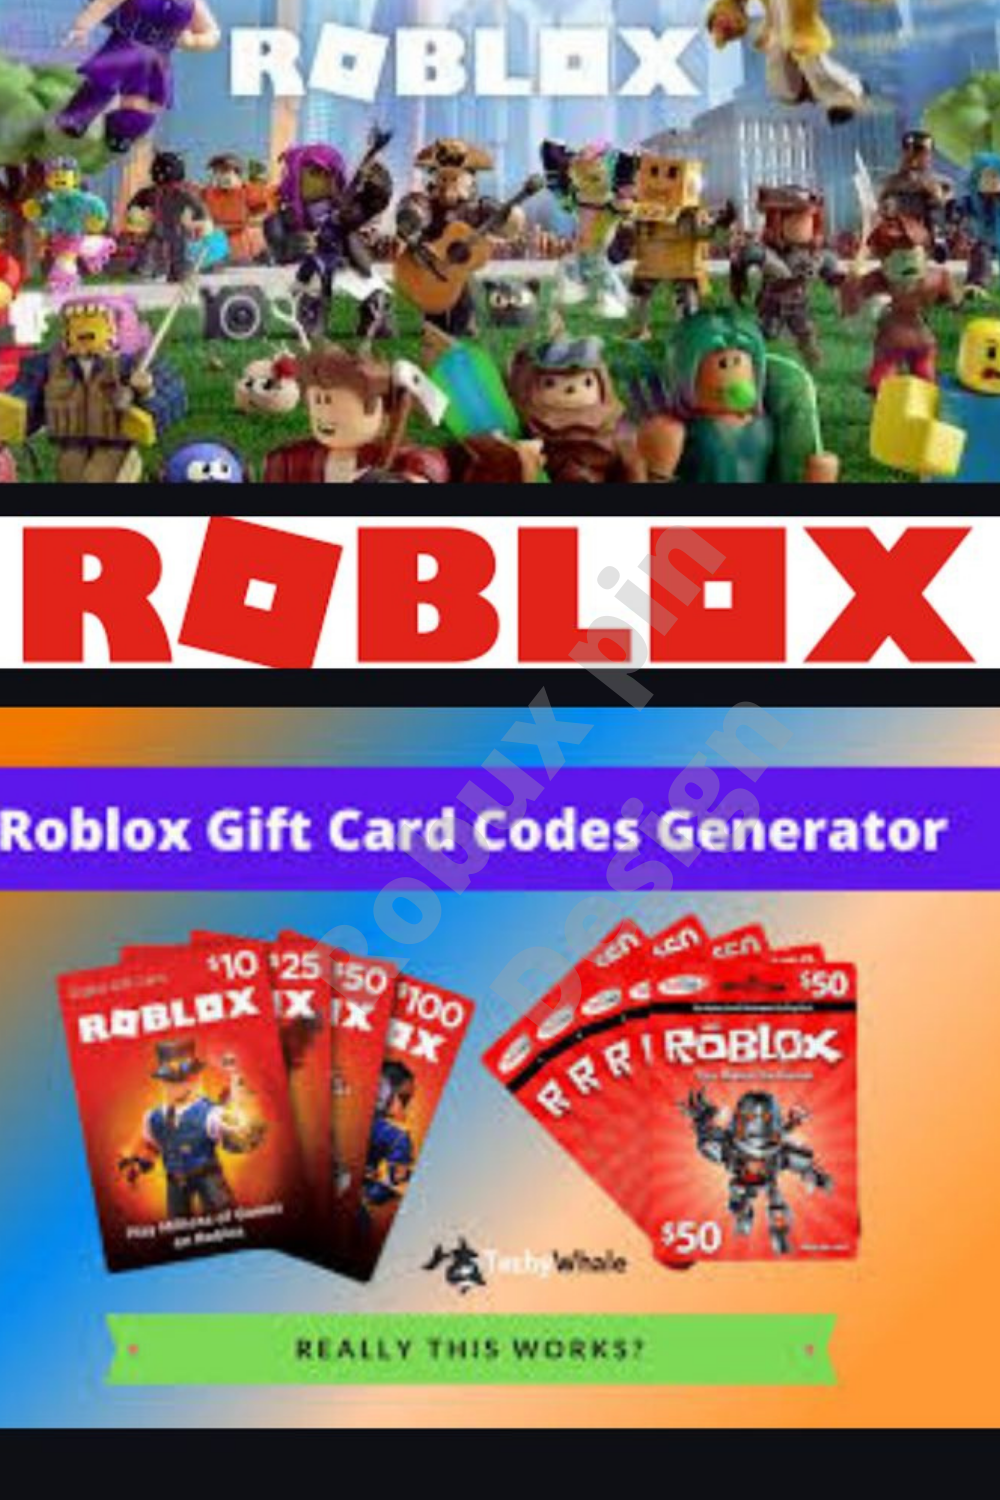 Roblox Robux Gift Card 10 25 50